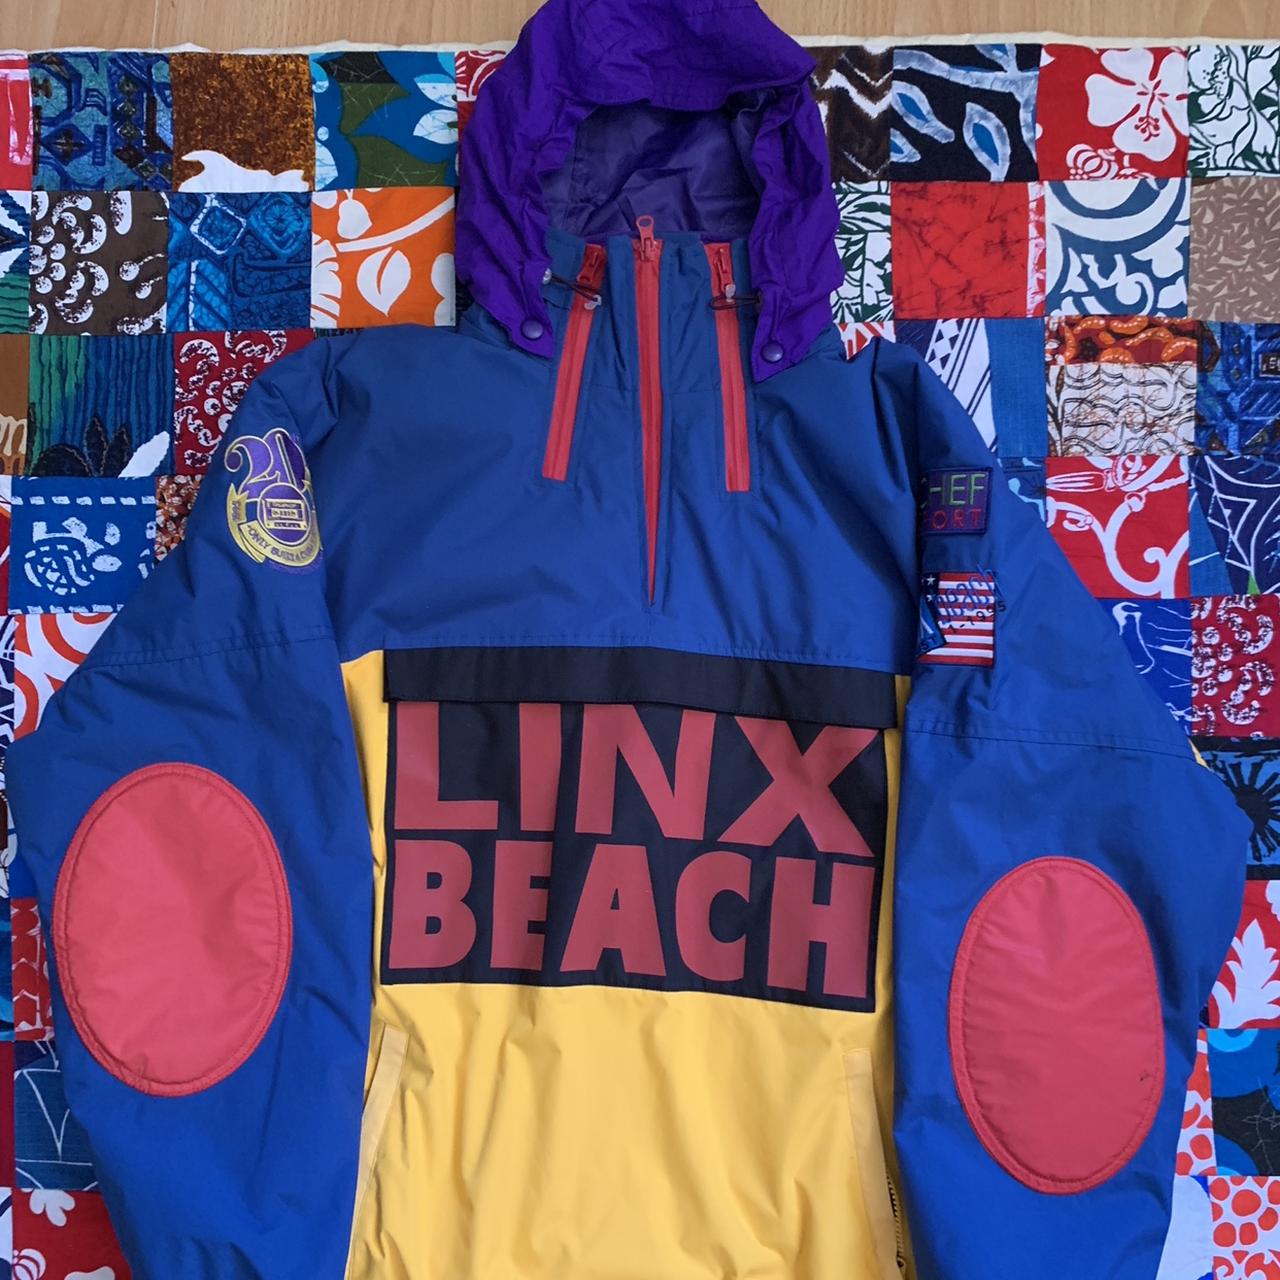 CL95 LINX BEACH (Snow Beach Color way), This is the...